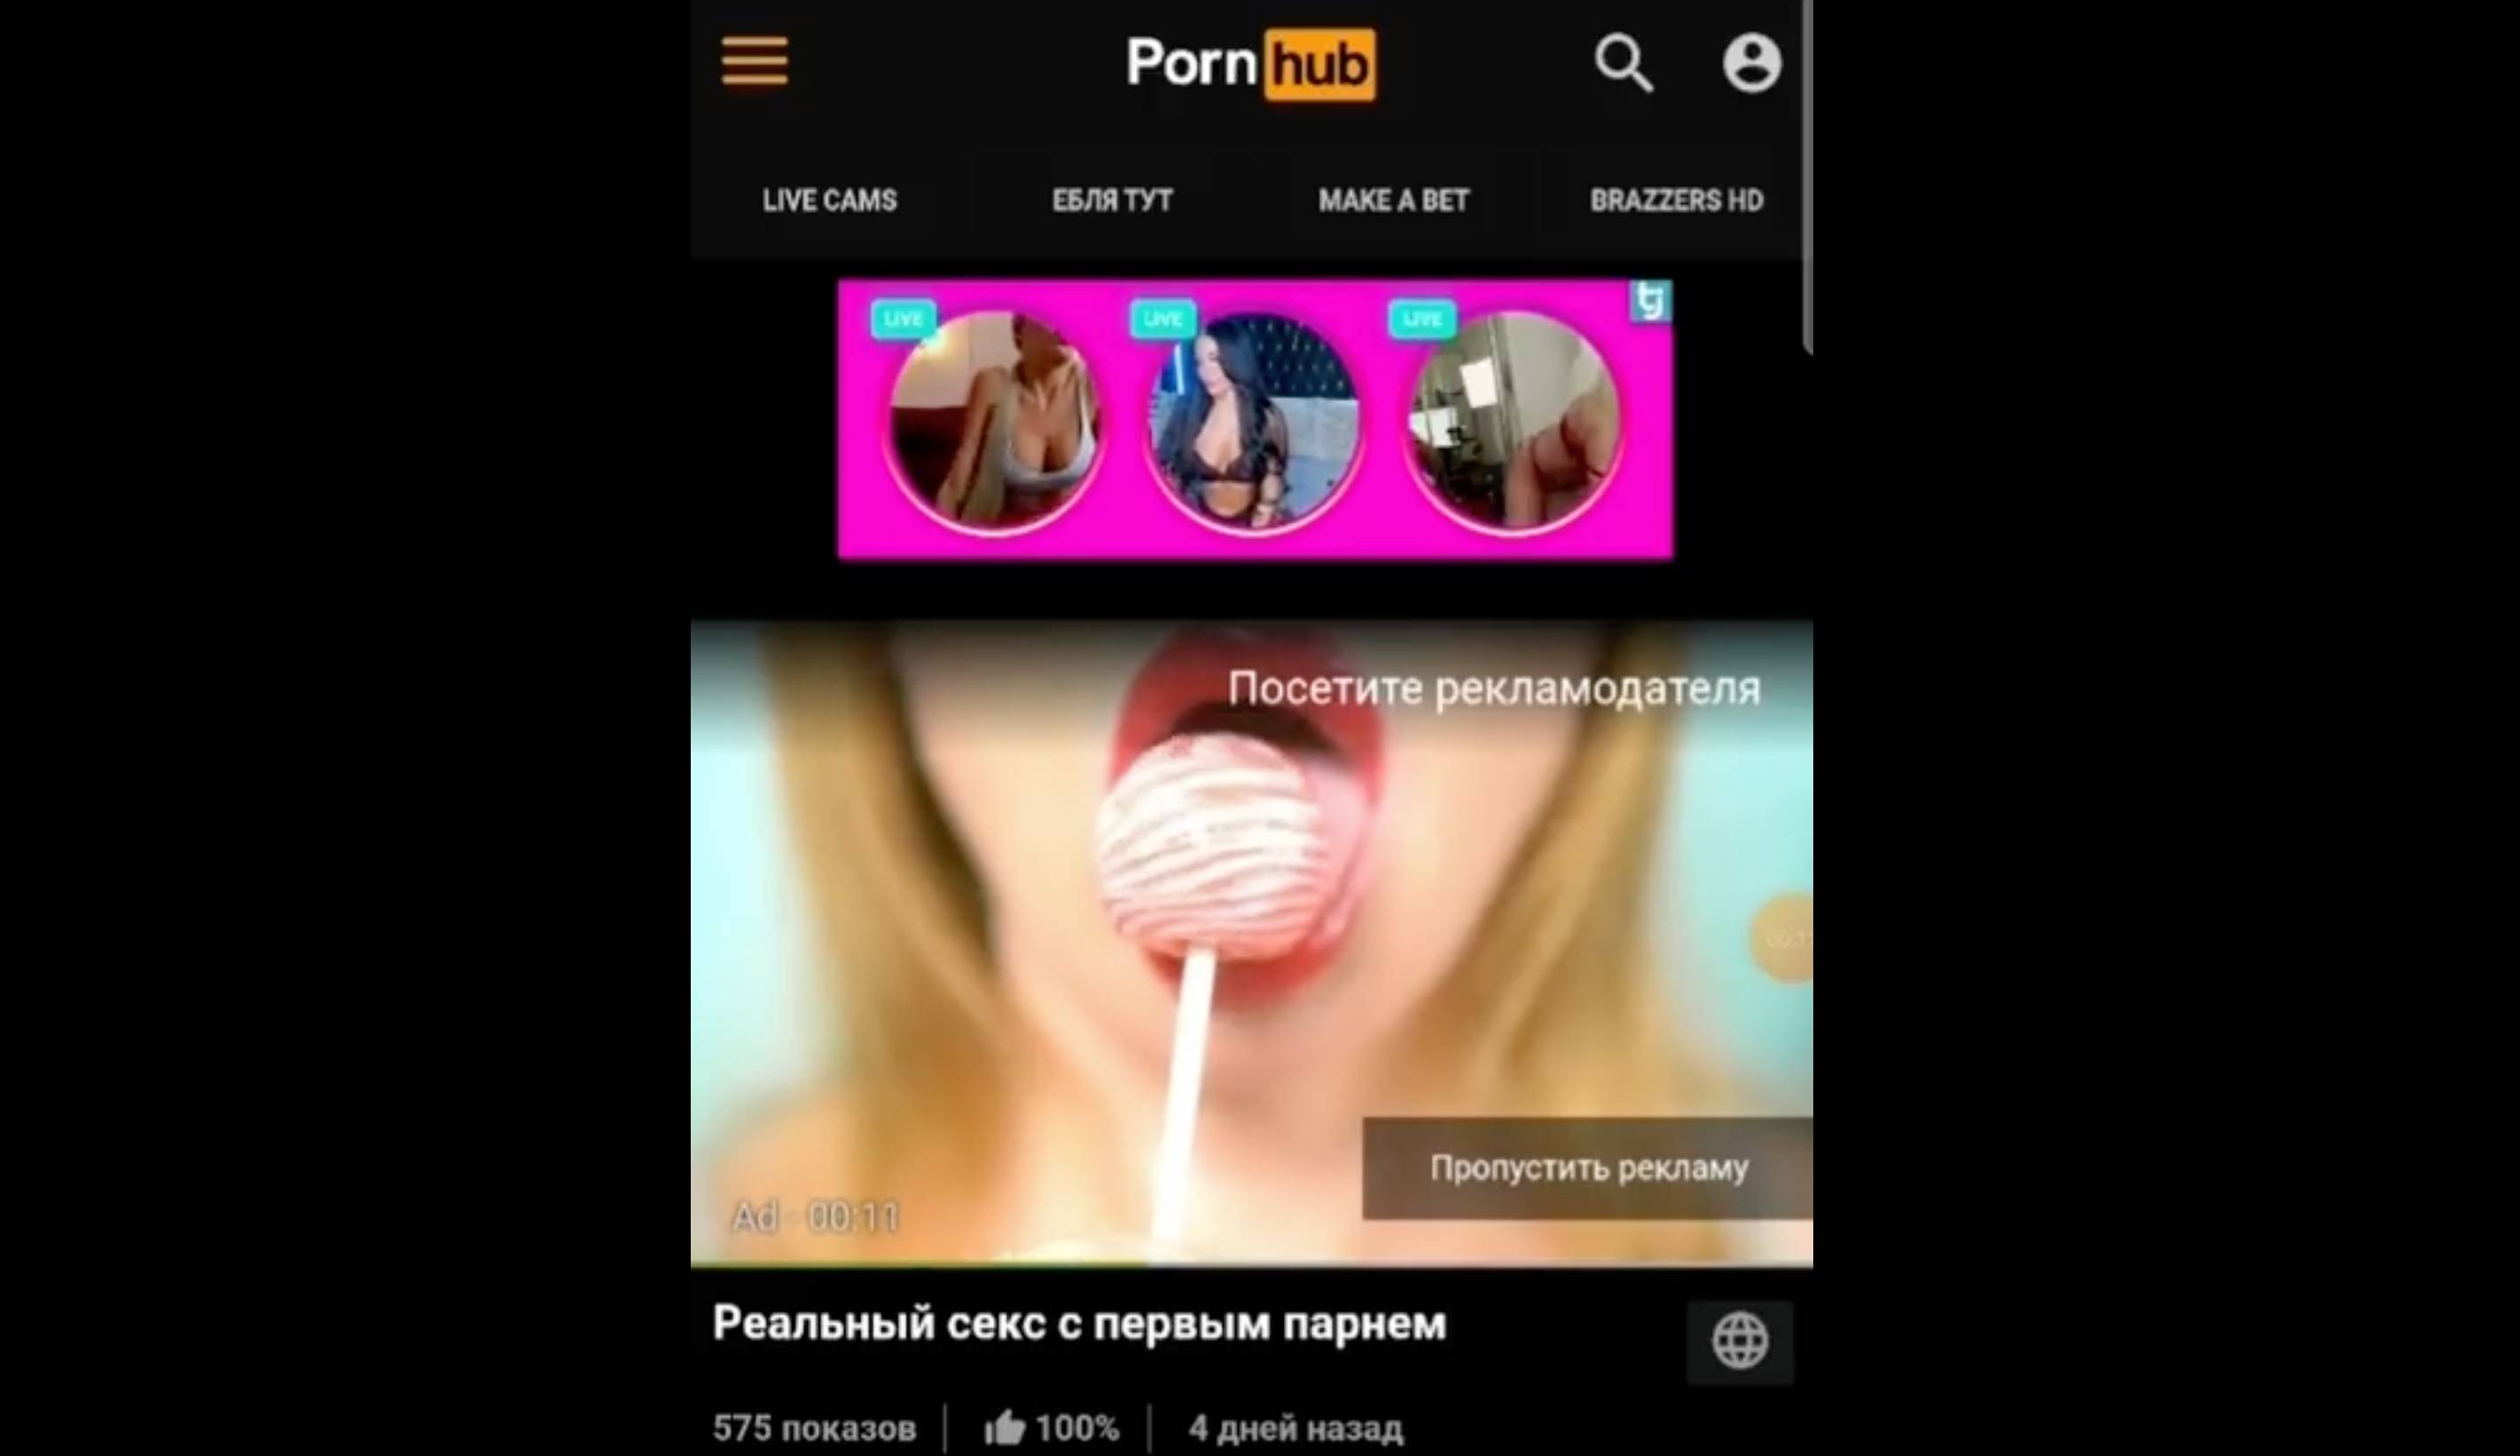 From Ypupprn - Notorious Russian Mercenaries Wagner Are Advertising on Pornhub